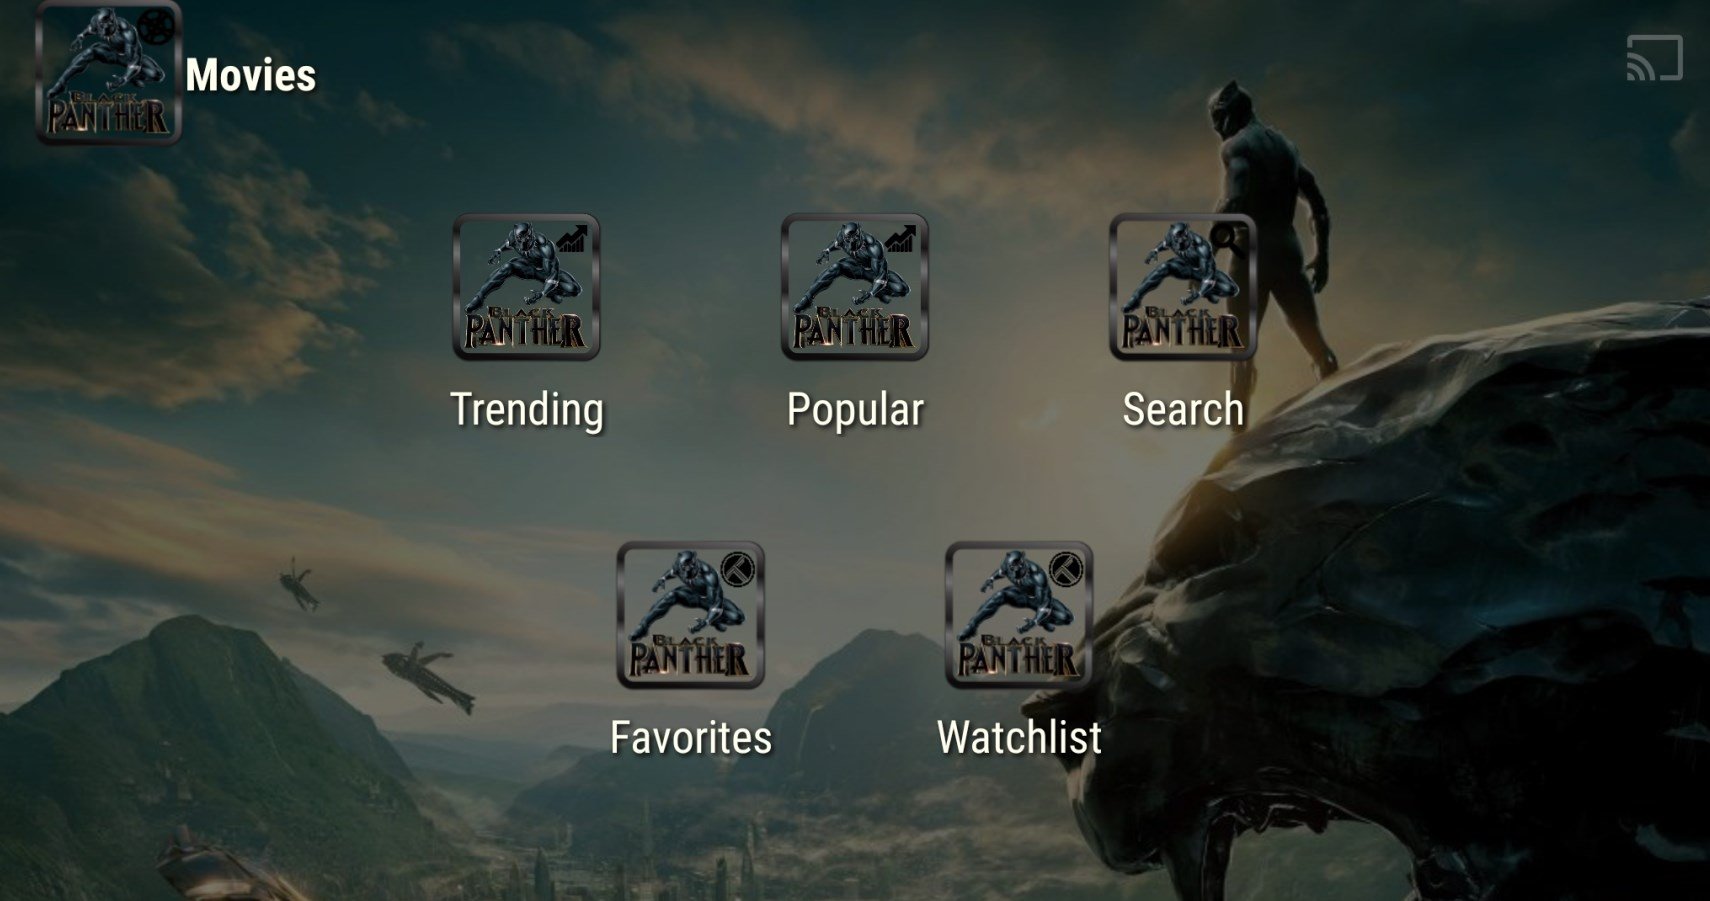 Black Panther TV 1.13 - Download for Android APK Free